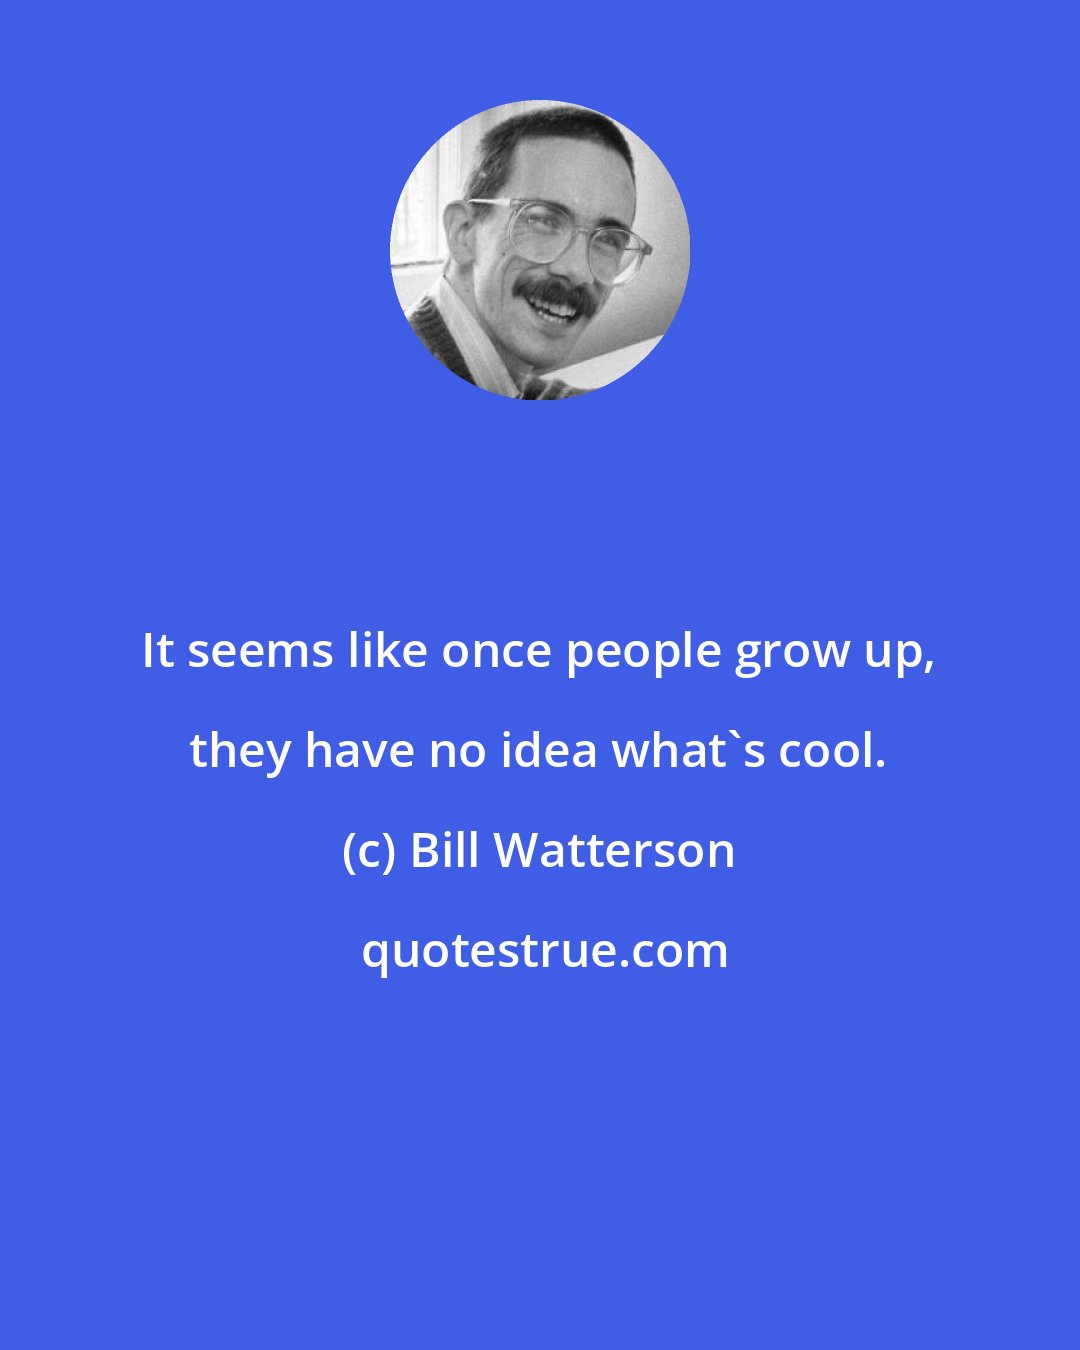 Bill Watterson: It seems like once people grow up, they have no idea what's cool.